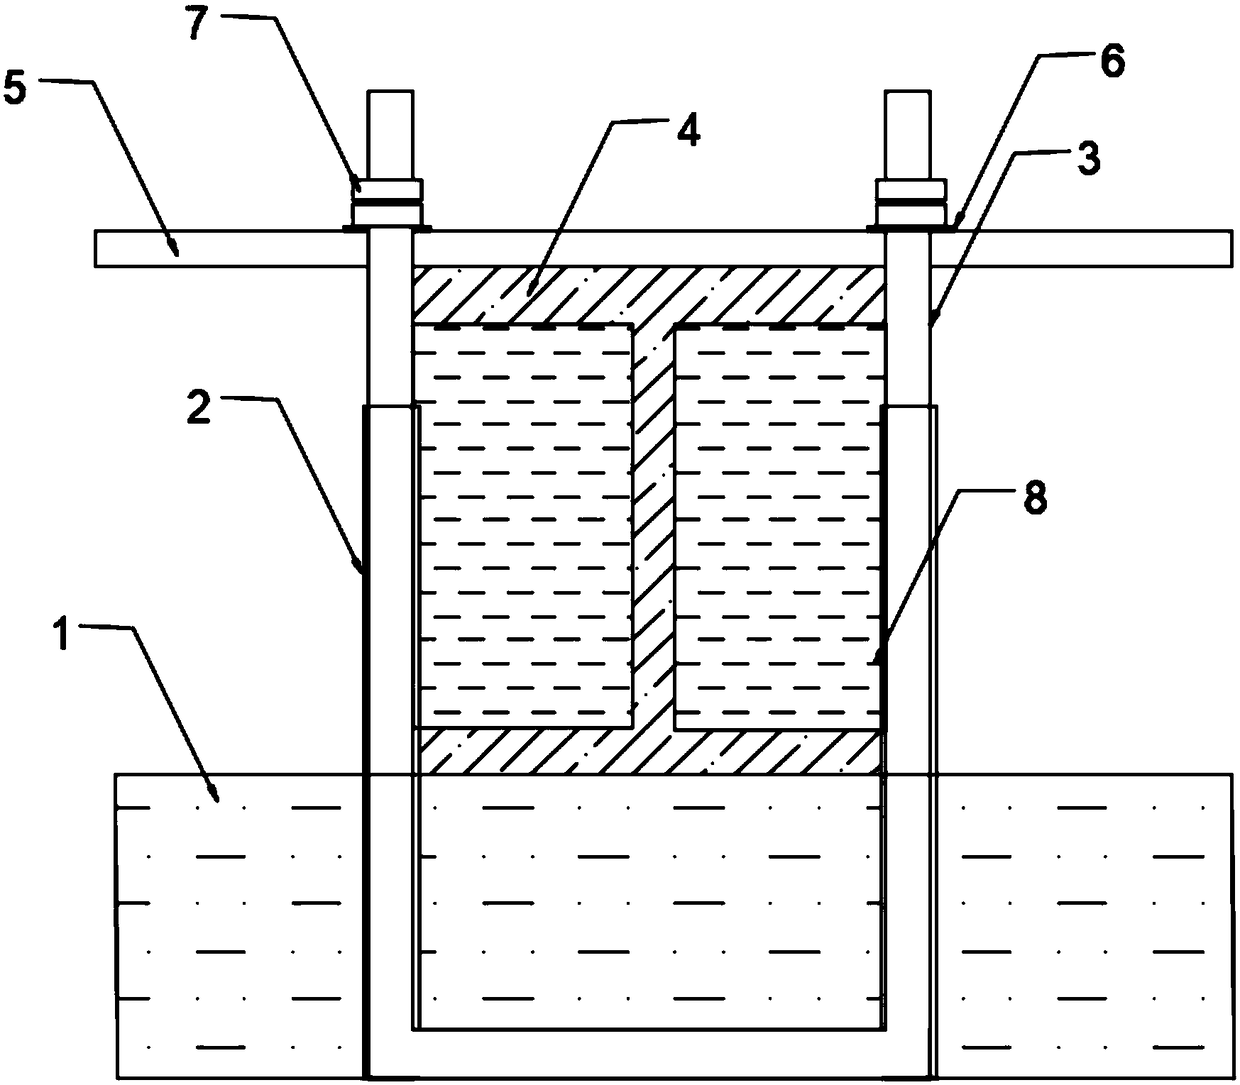 Non-bonded detachable embedded part of unloading platform of high-rise building and construction process thereof